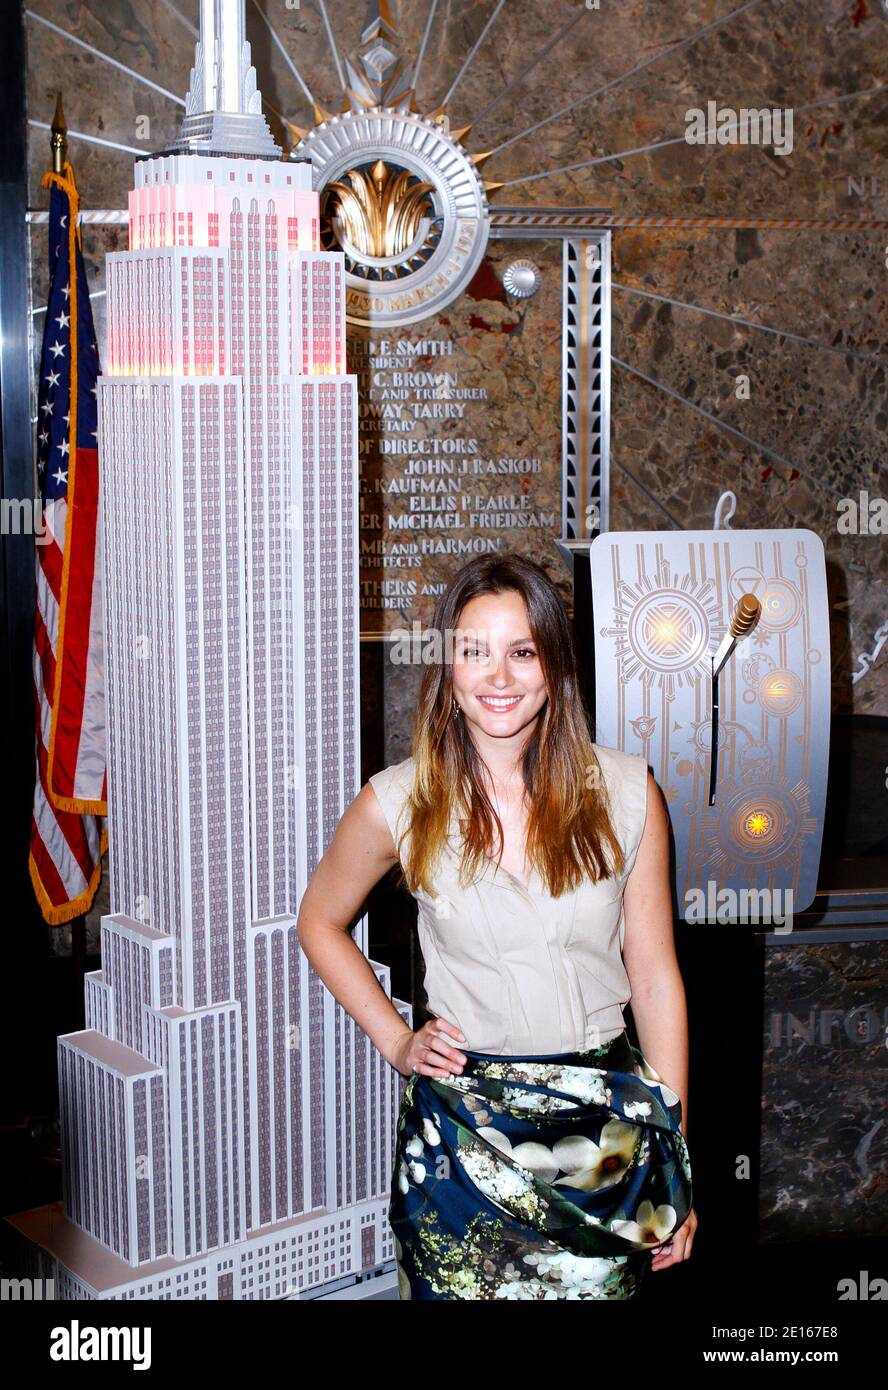 Leighton Meester appears during the lighting ceremony to celebrate the 5th Annual DKMS Gala at the Empire State Building in New York City, NY, USA on April 28, 2011. Photo by Donna Ward/ABACAPRESS.COM Stock Photo